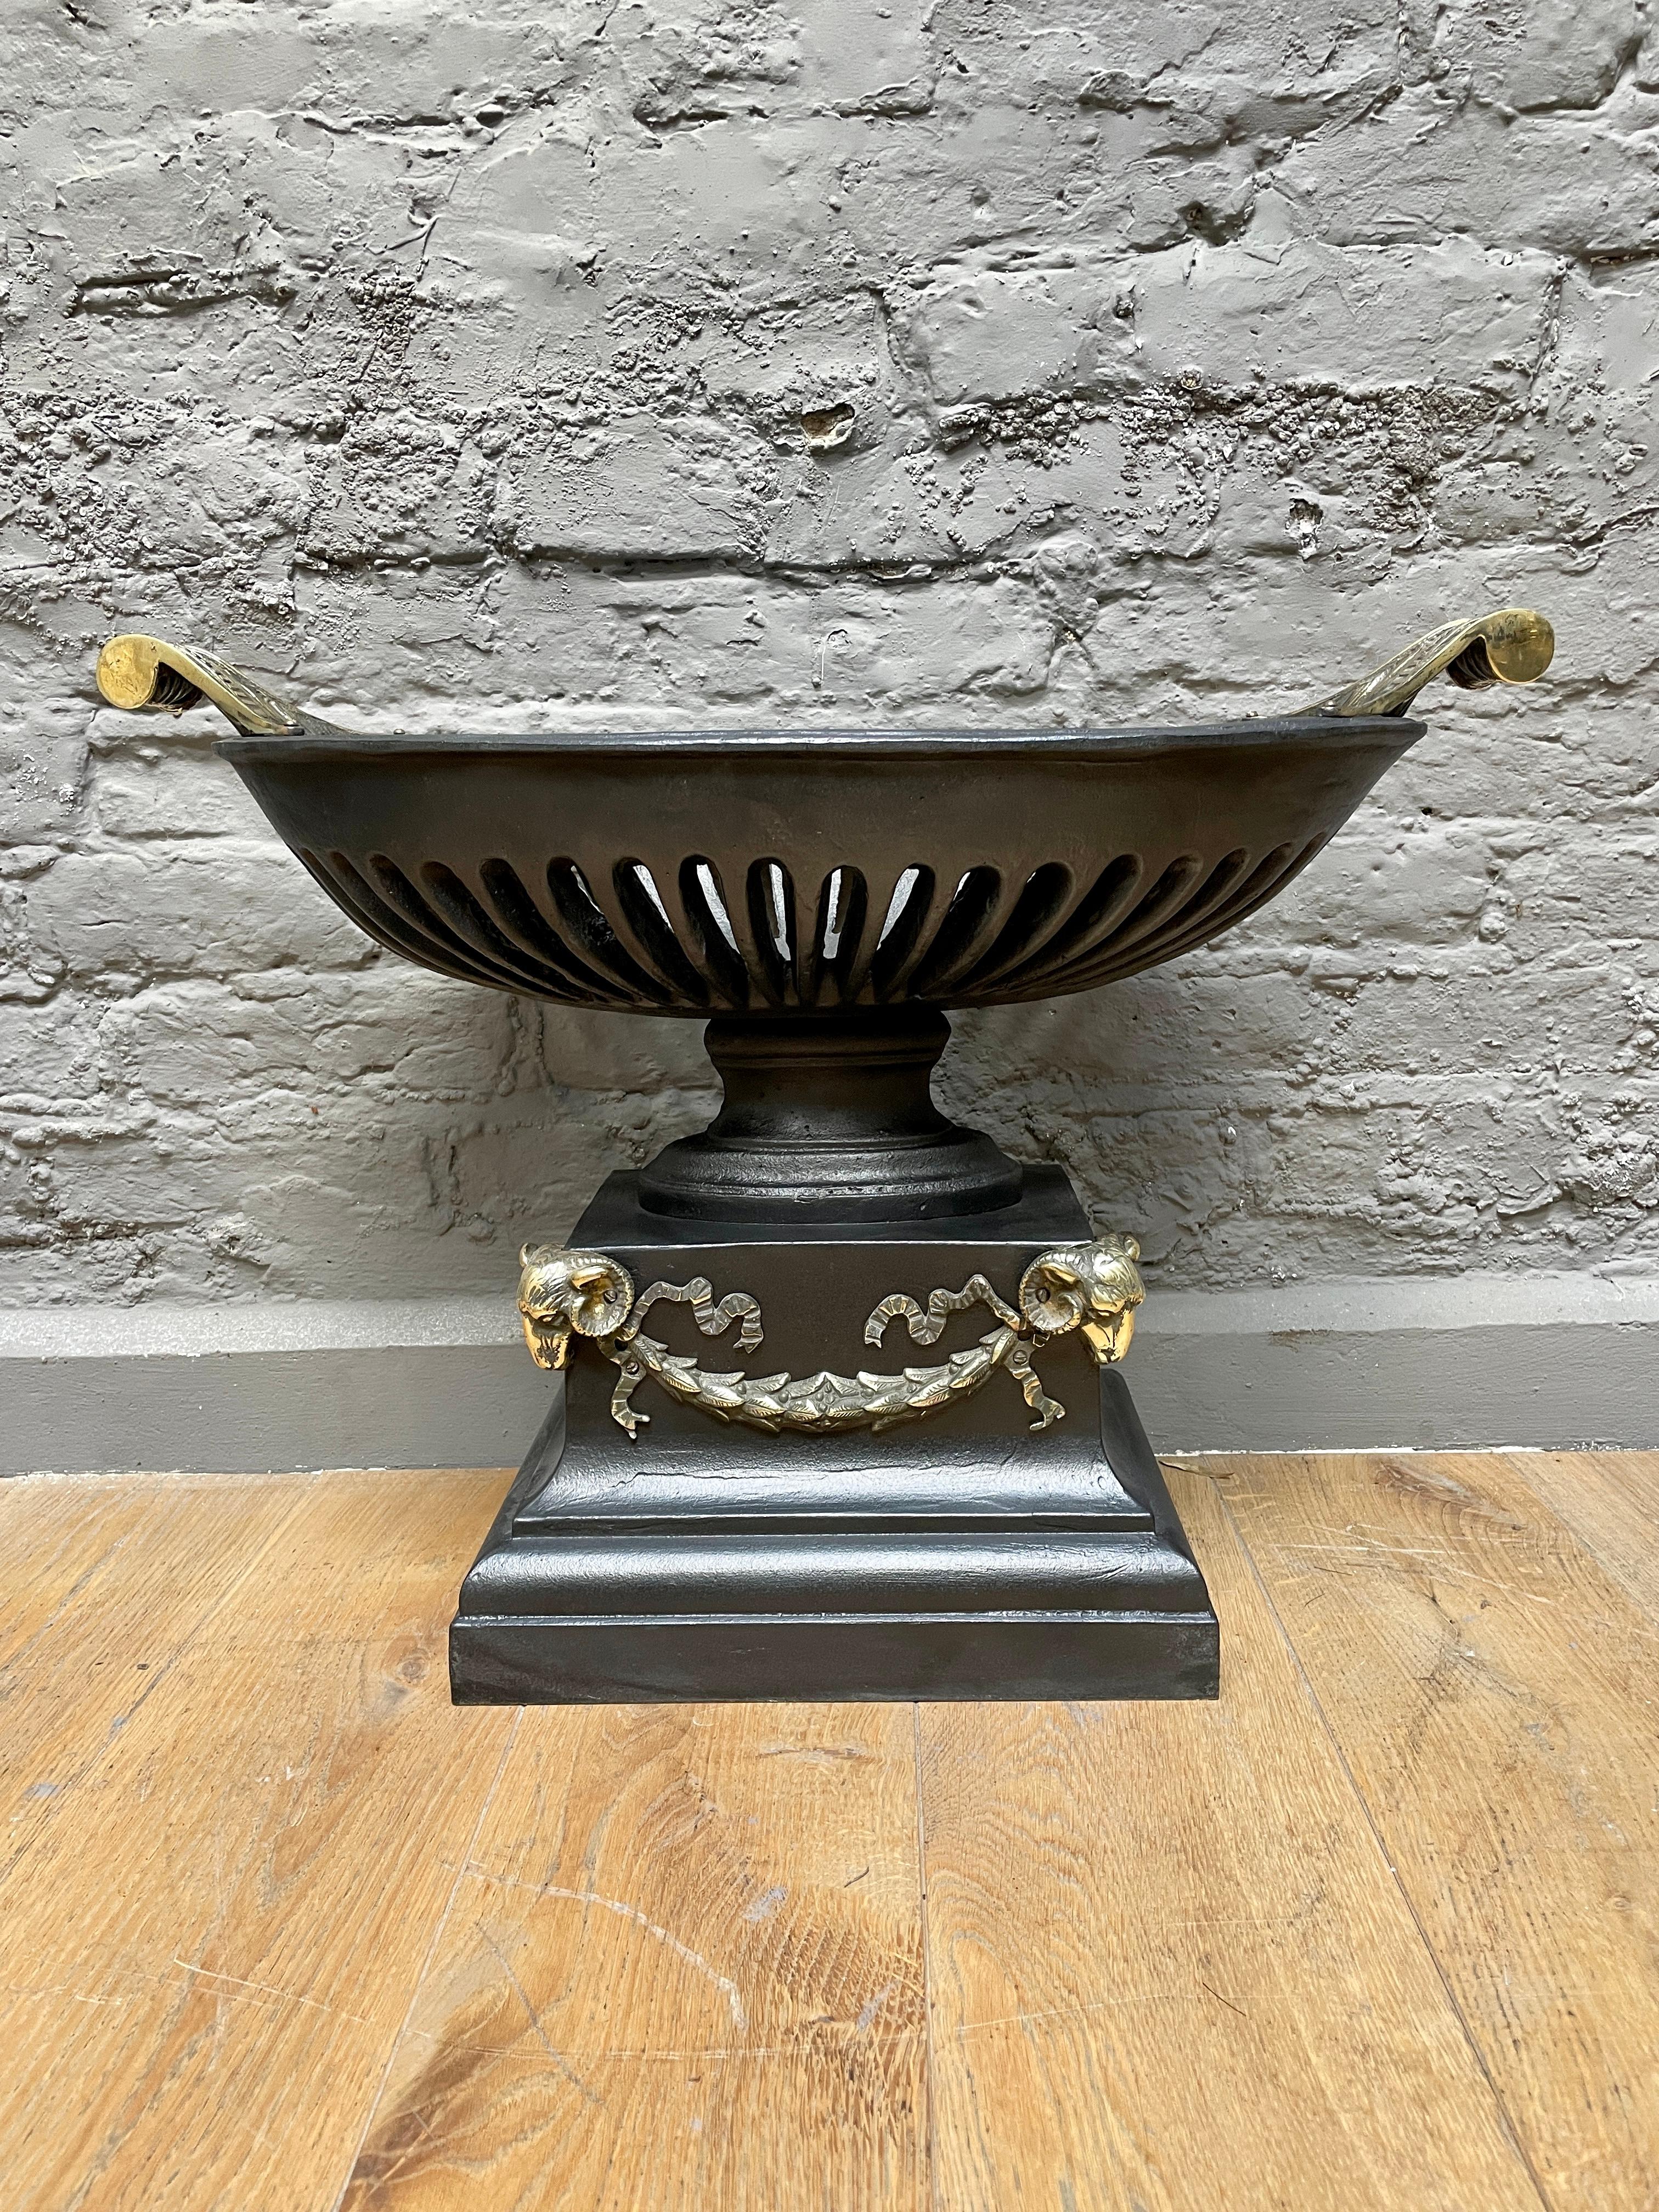 A pair of Regency style Urn grates, in cast iron and brass. The swept and scrolled handles to top of urns, with rams heads and swags to base. A good quality pair of English fire grate circa 1900 in the Regency style 

Can be sold individually.